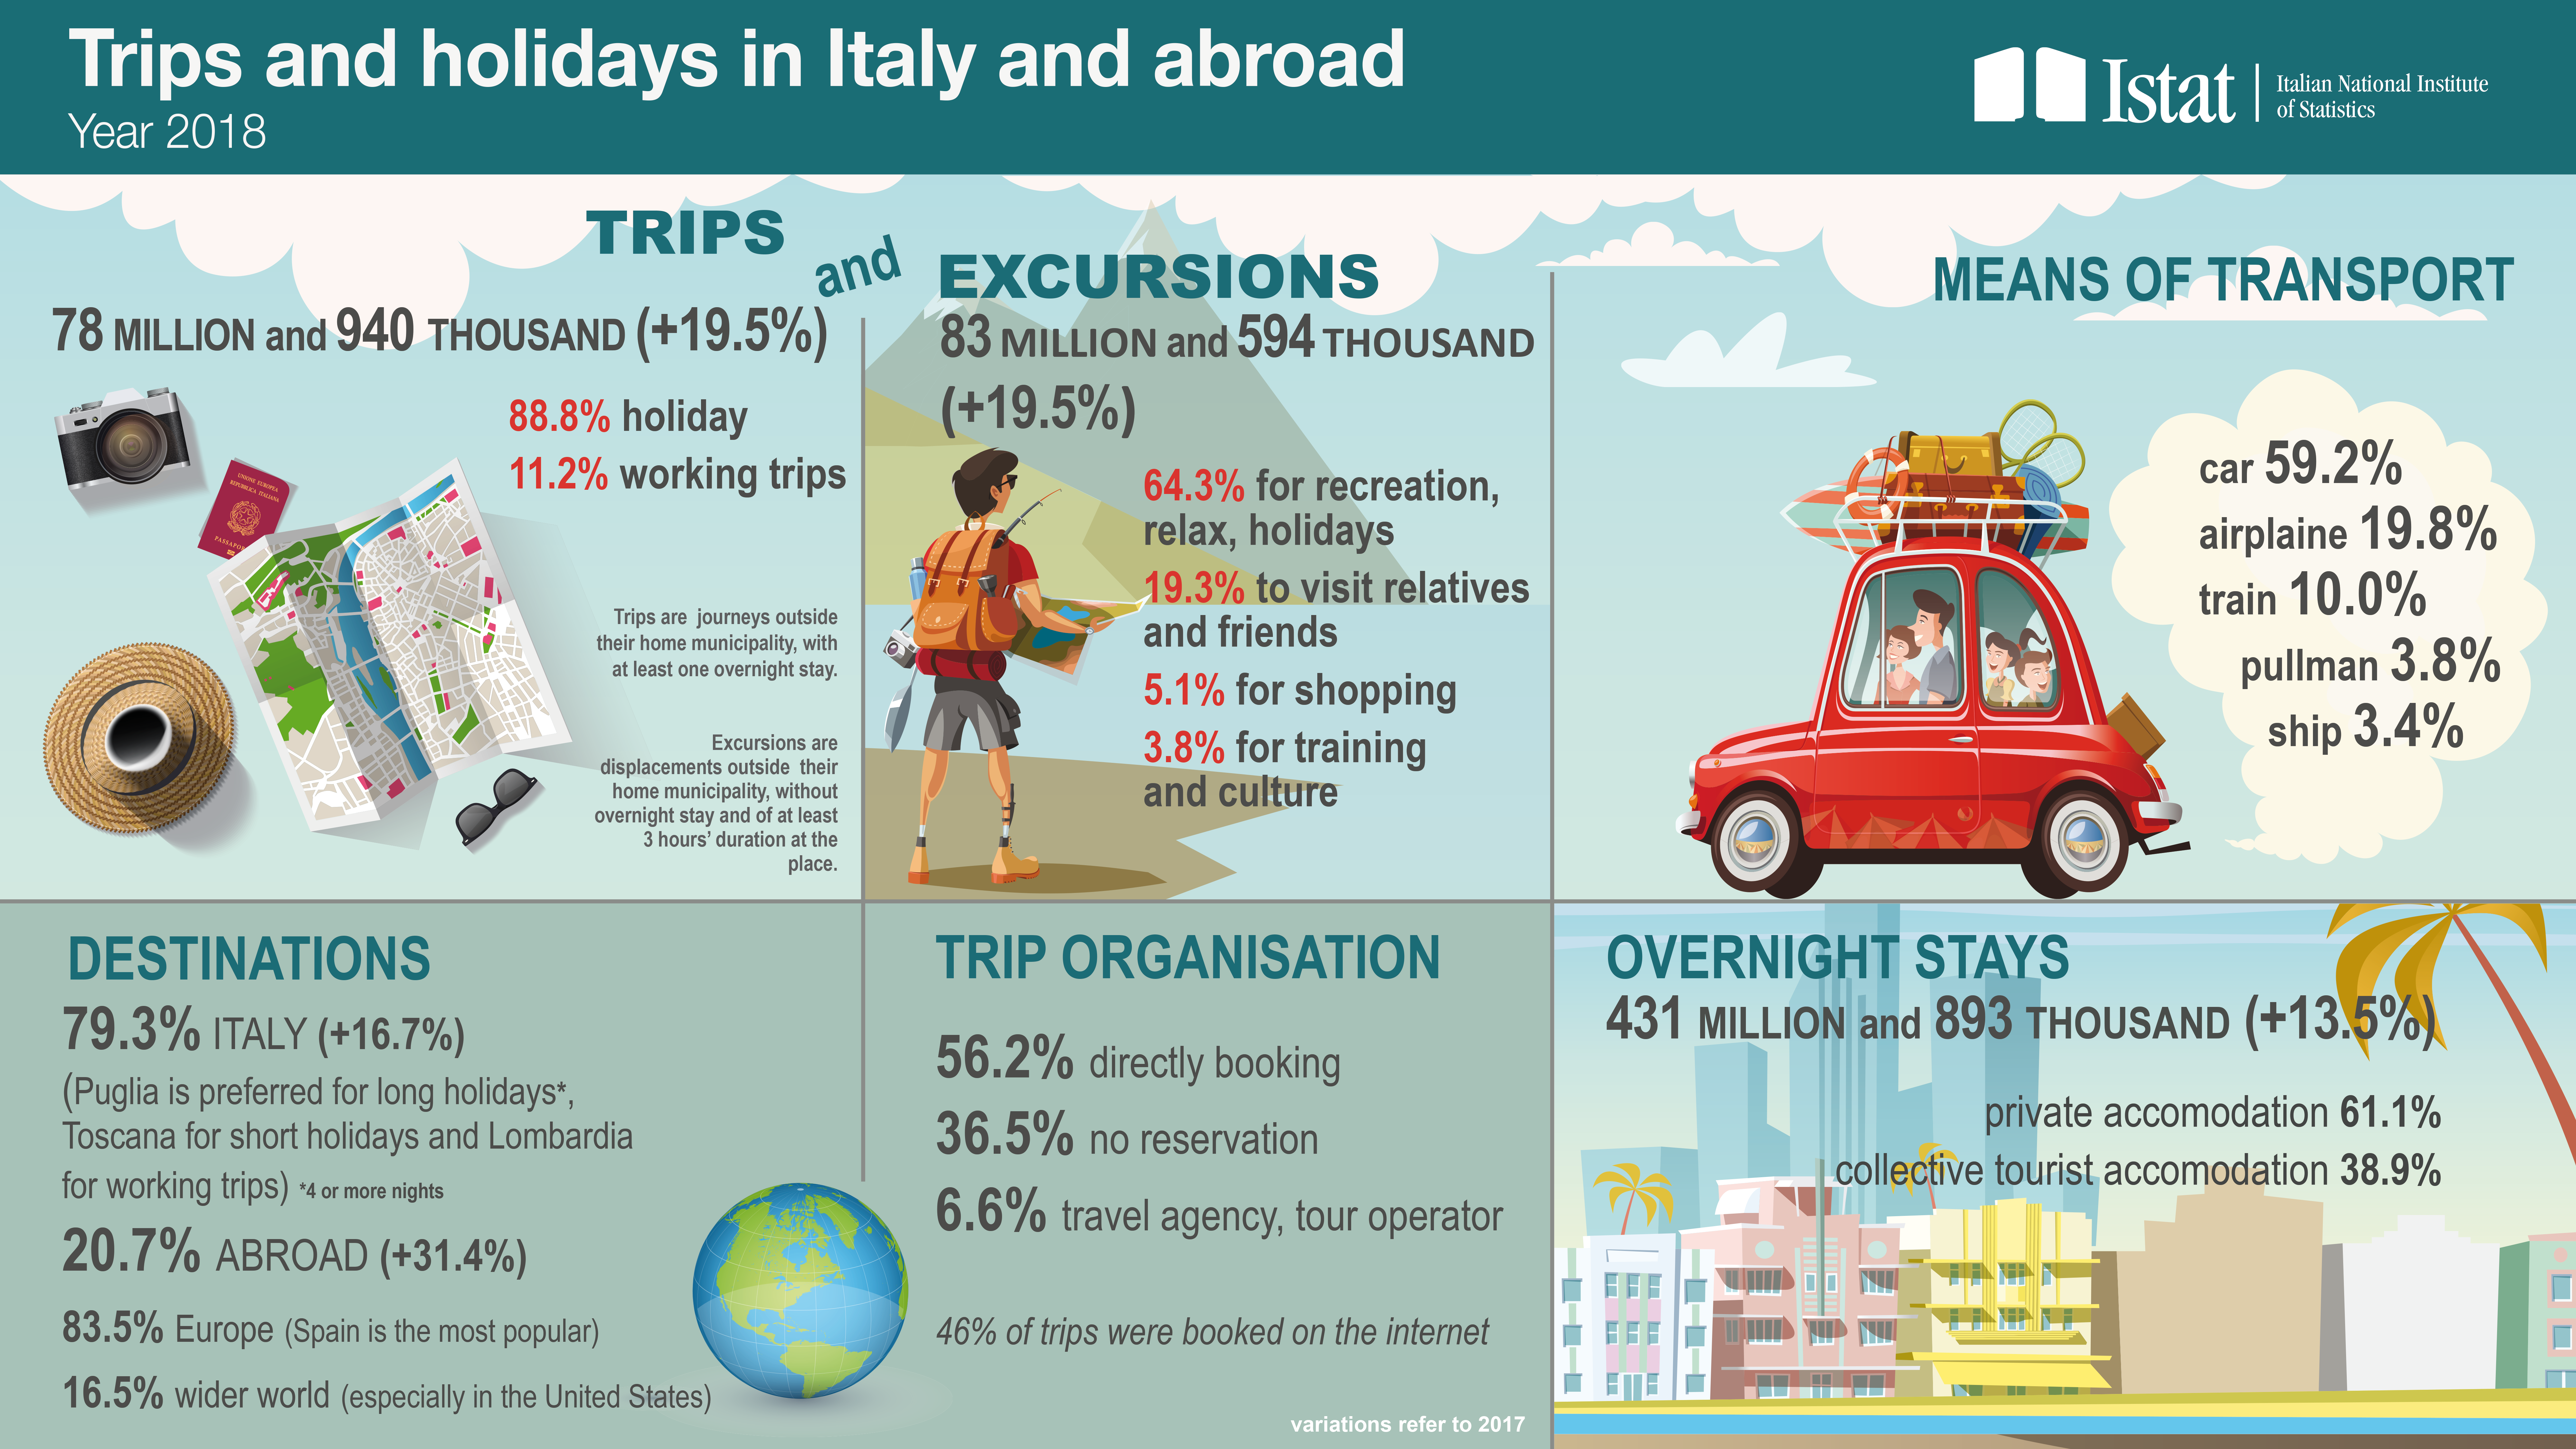 Infographic on trips and holidays in Italy and abroad in 2018